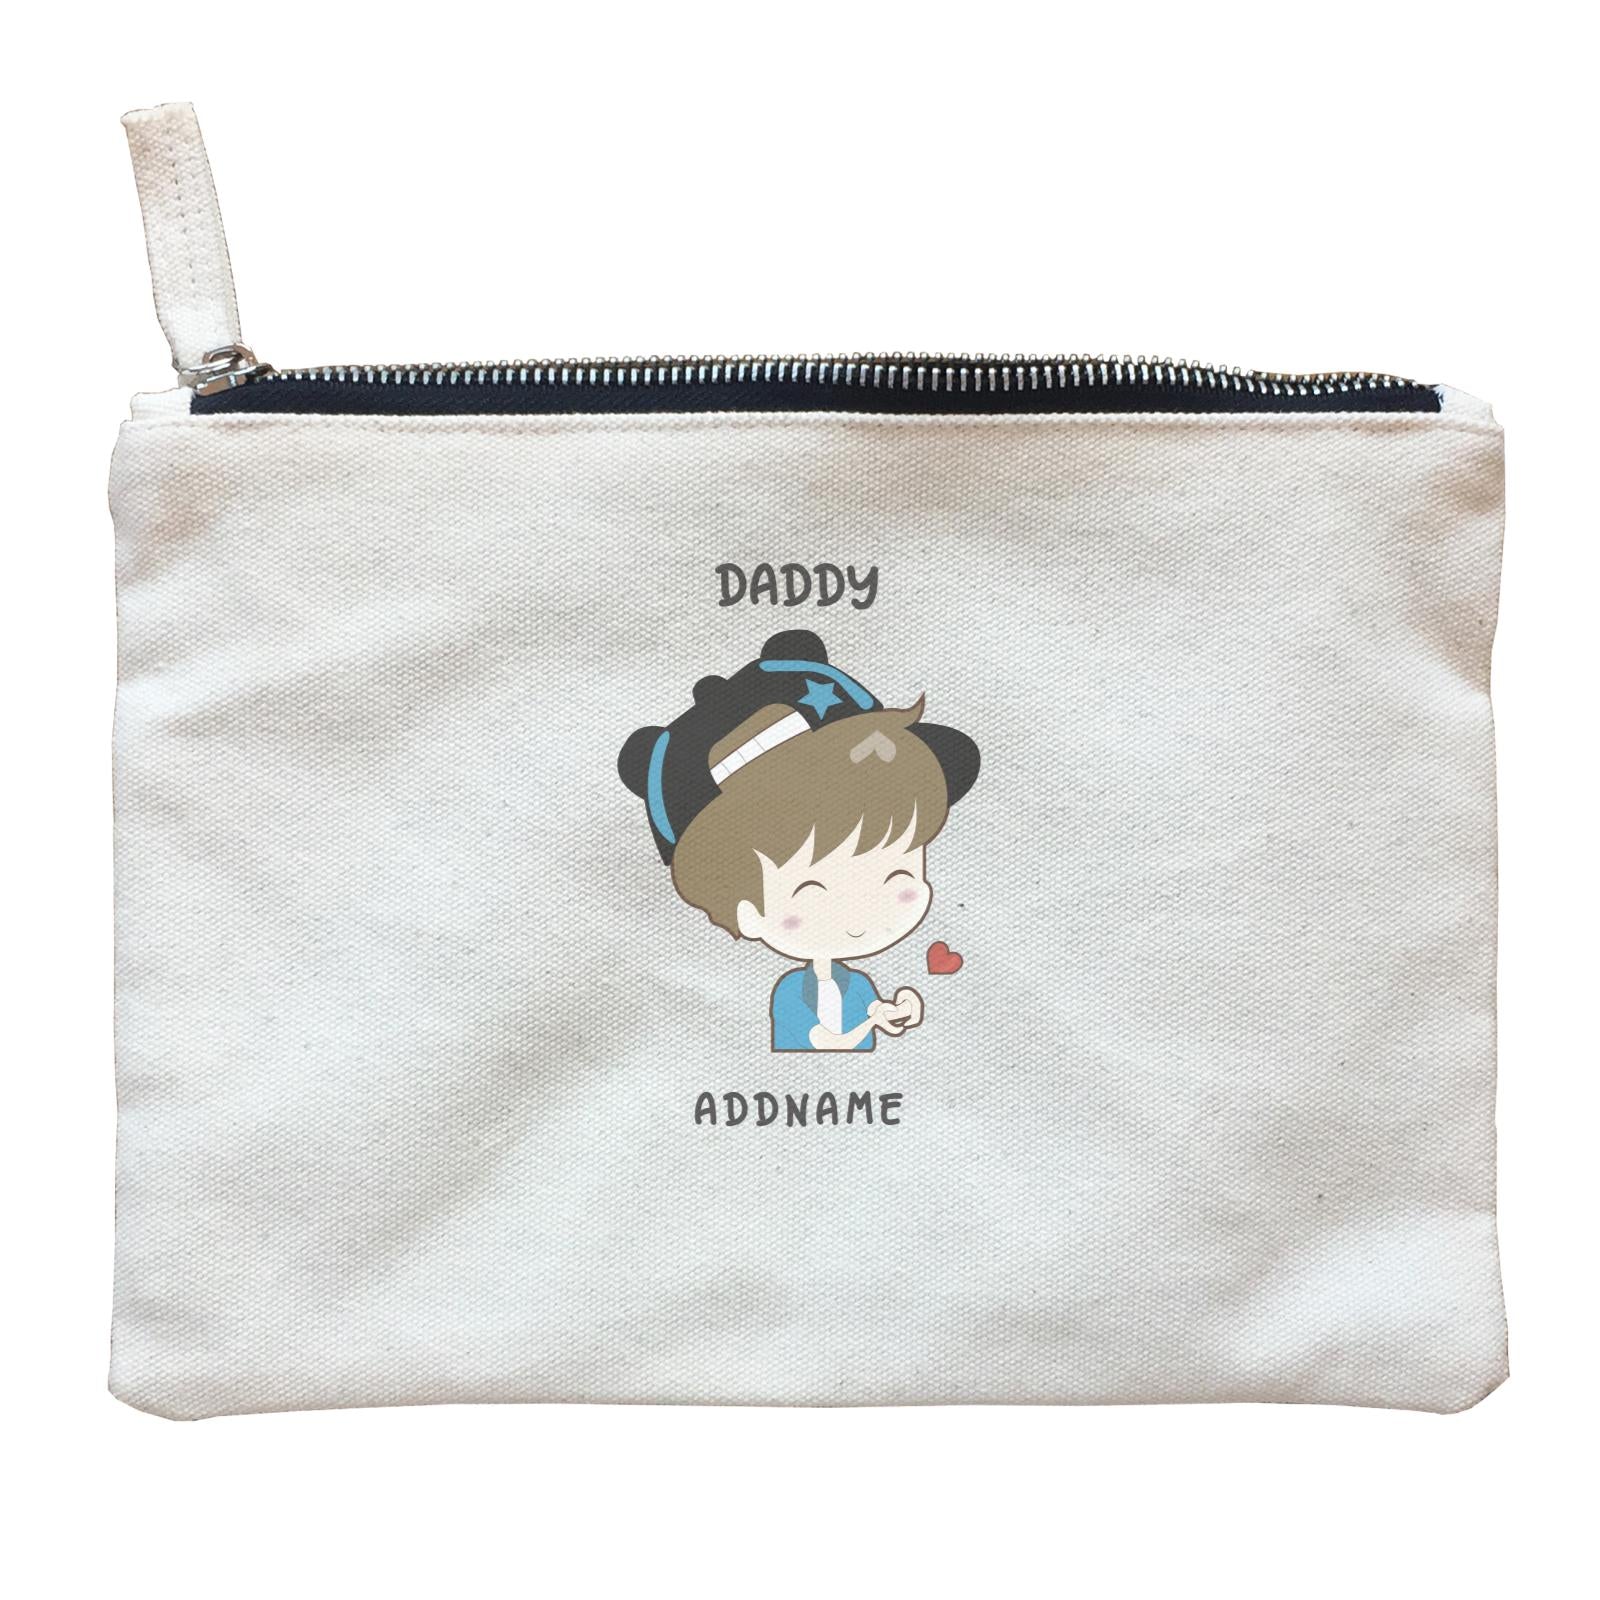 My Lovely Family Series Daddy Addname Zipper Pouch